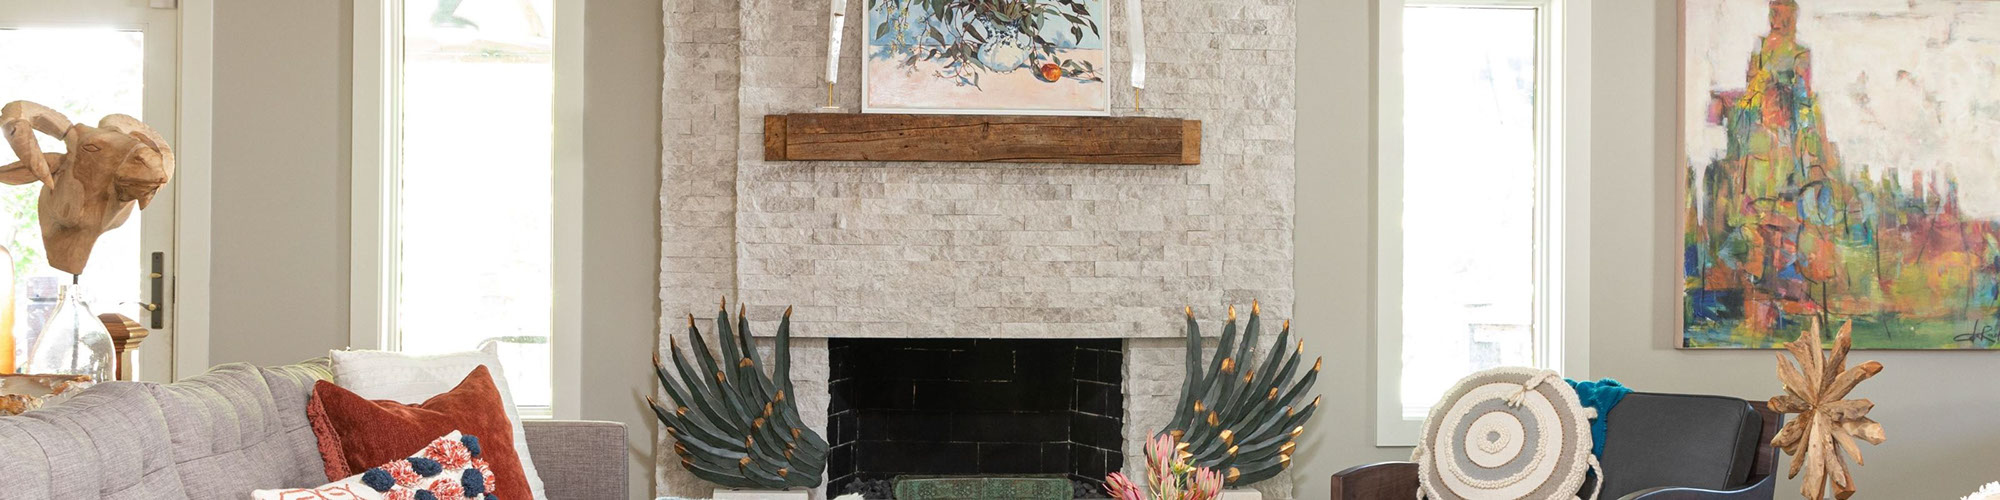 Rustic fireplace with split-face cream limestone tile façade, wood mantle, honed limestone hearth holding pair of green sculptures.